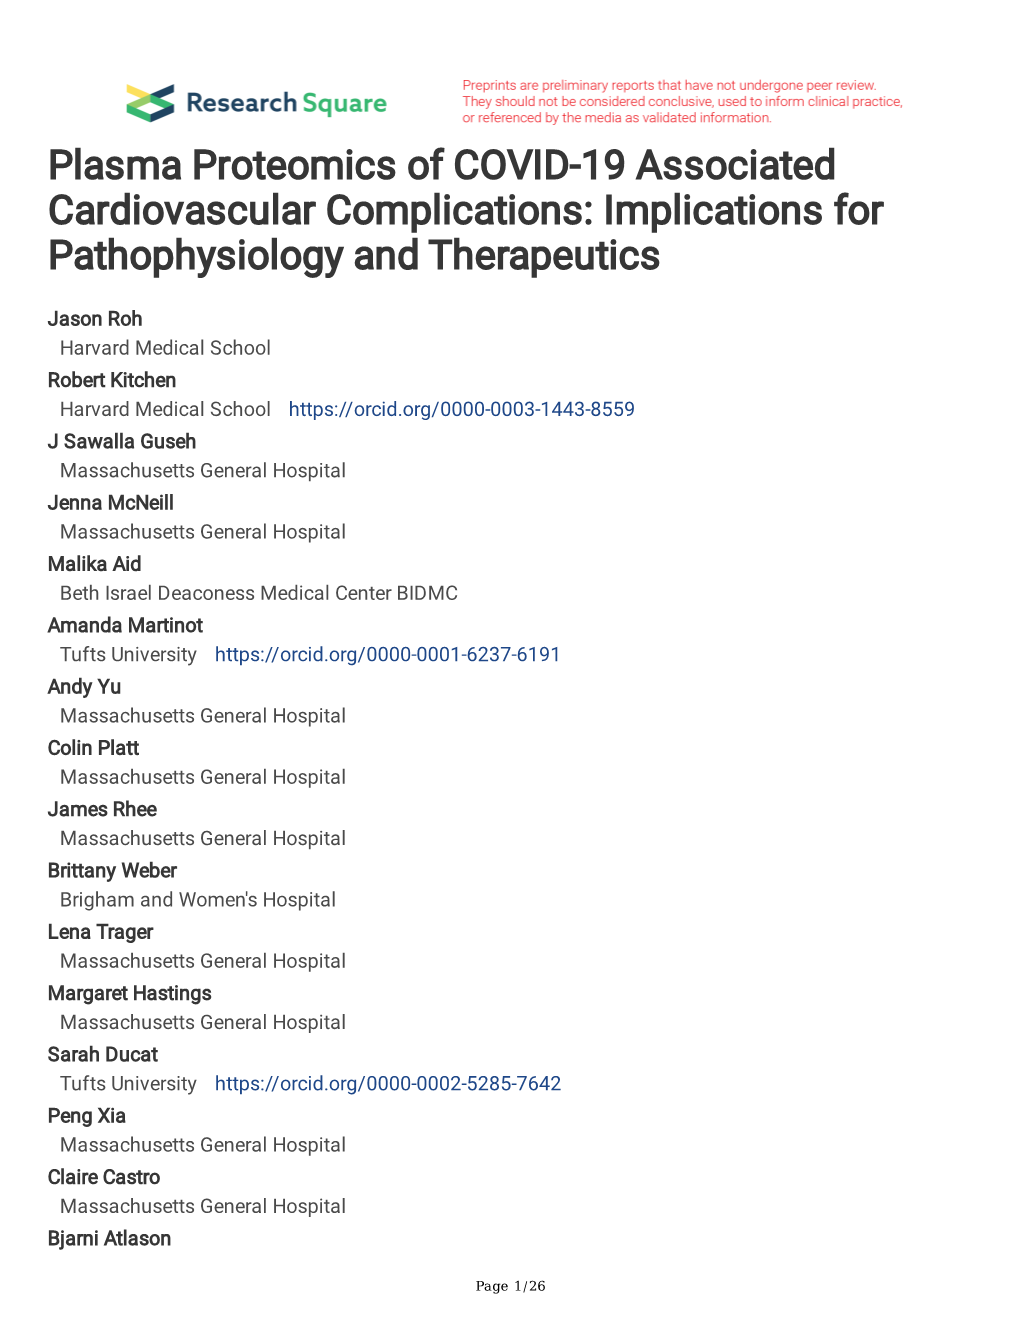 Plasma Proteomics of COVID-19 Associated Cardiovascular Complications: Implications for Pathophysiology and Therapeutics